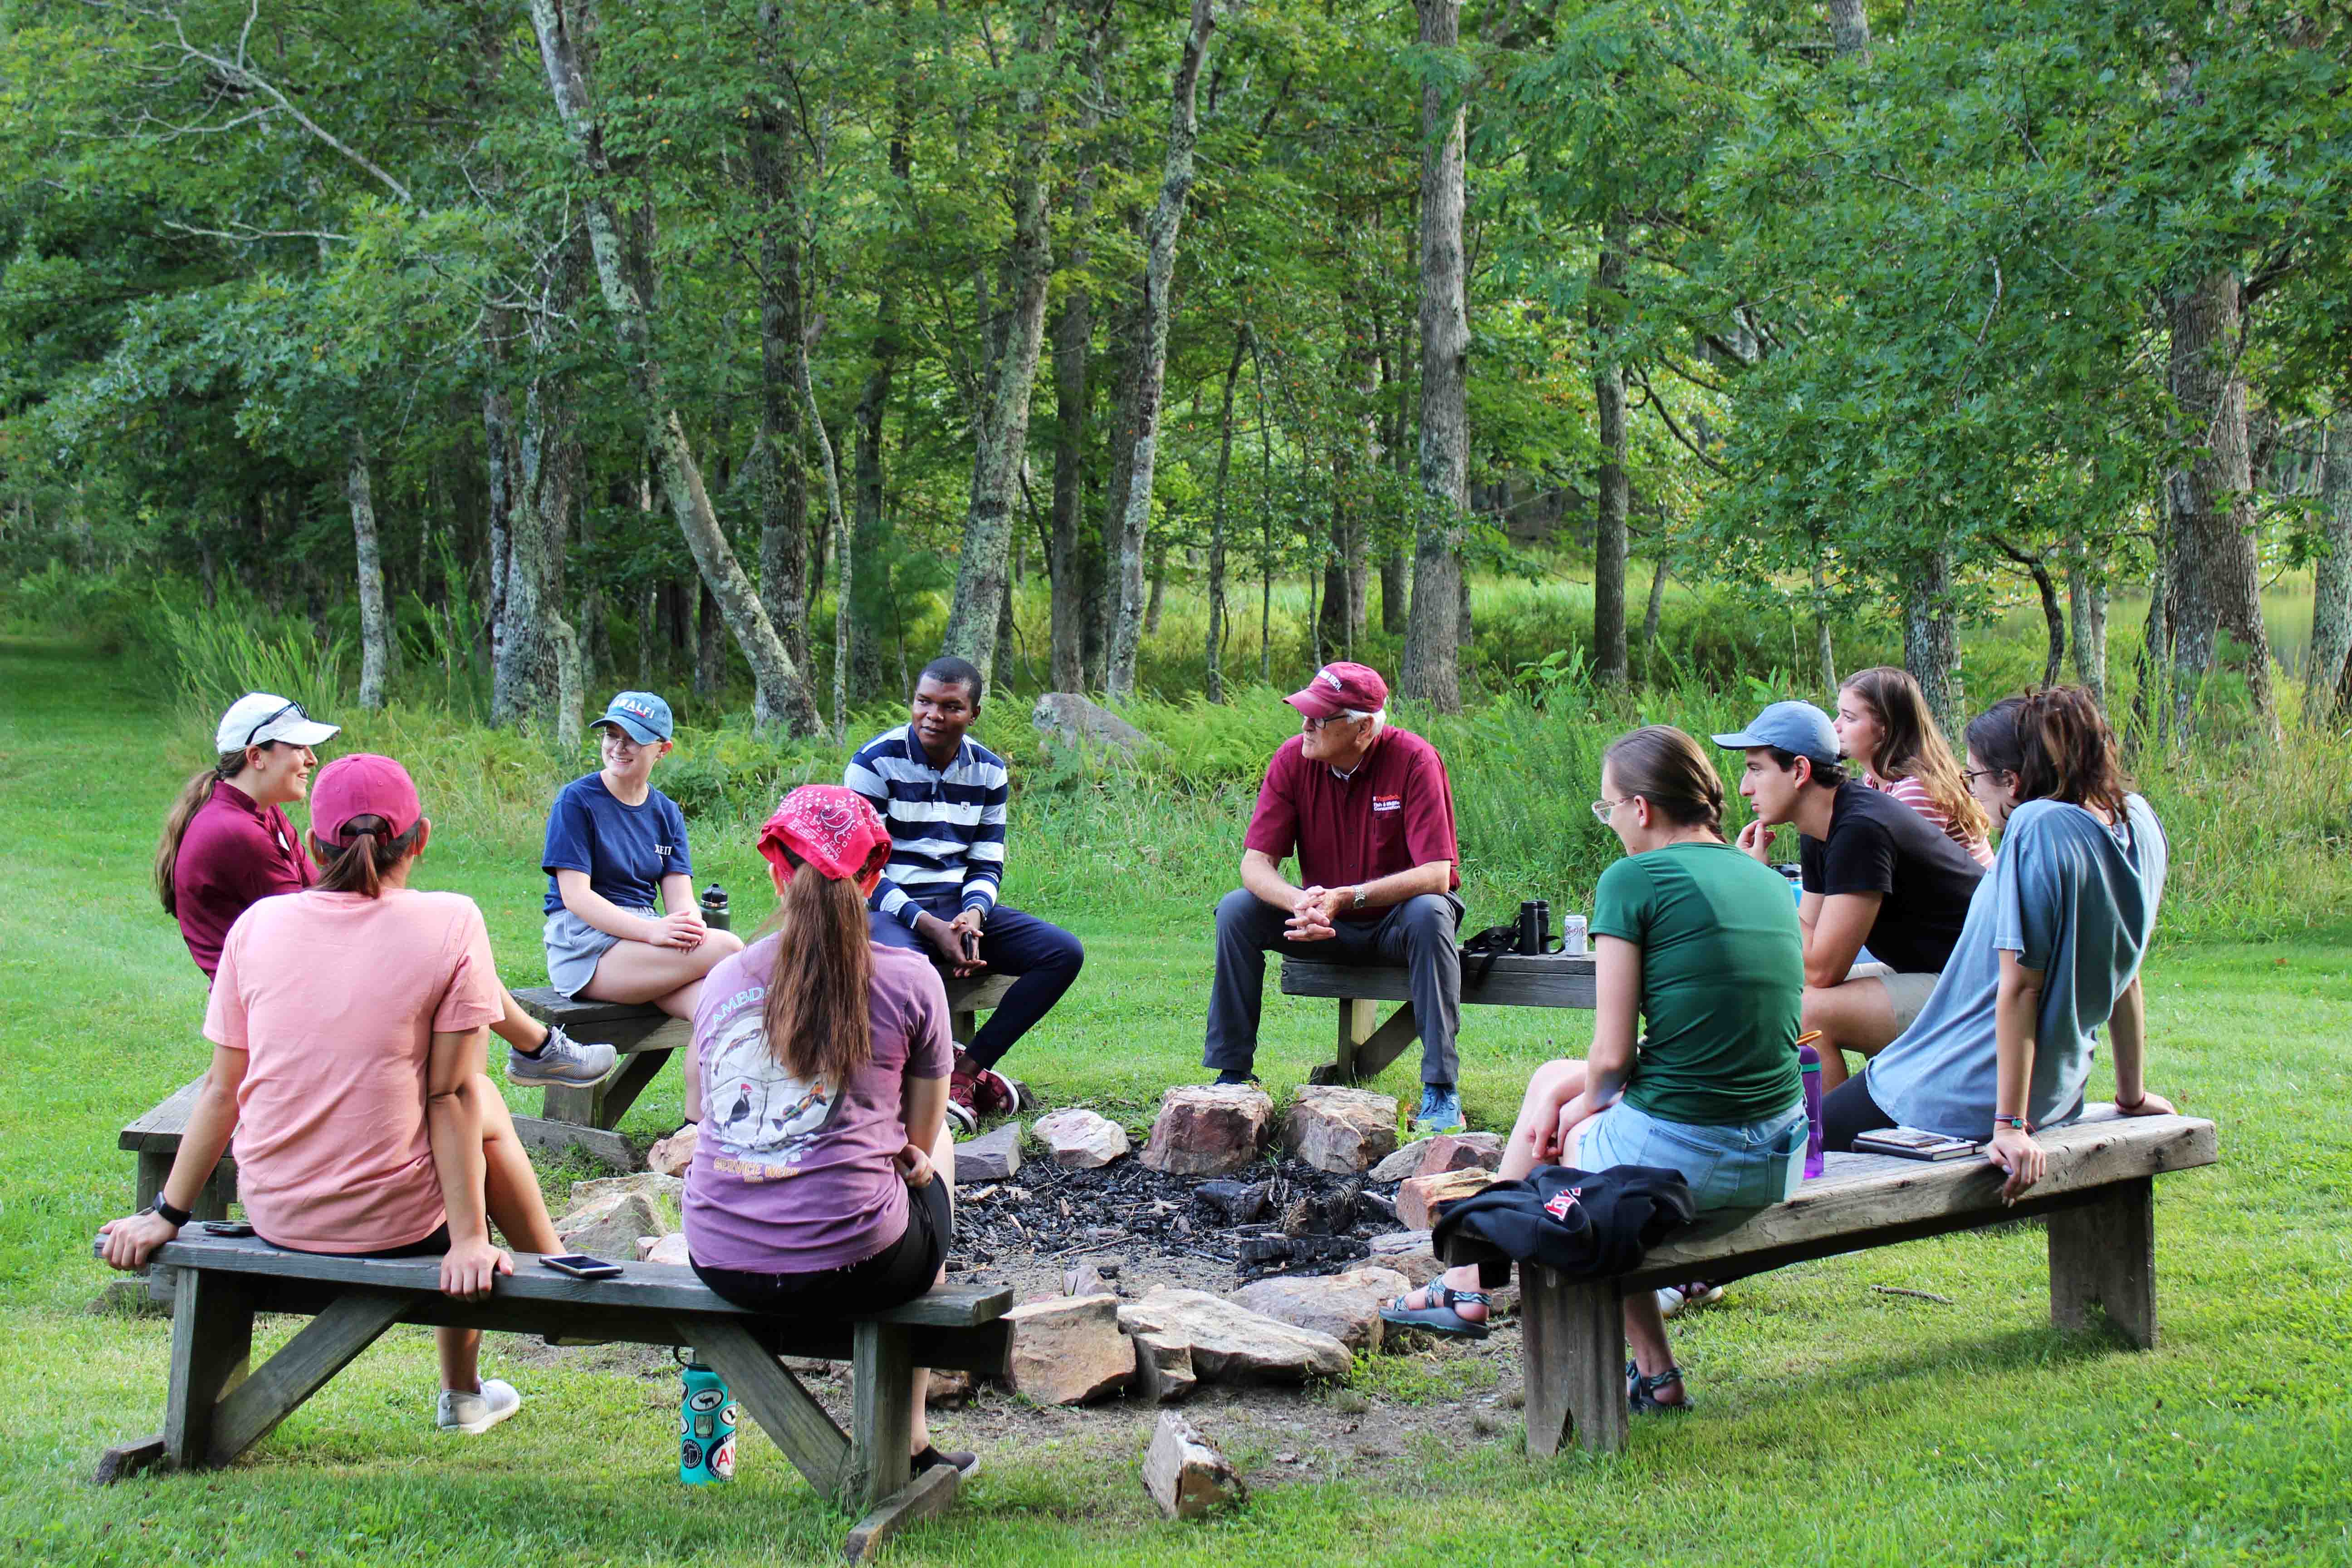 Students and a professor sit on benches in a circle around a campfire.